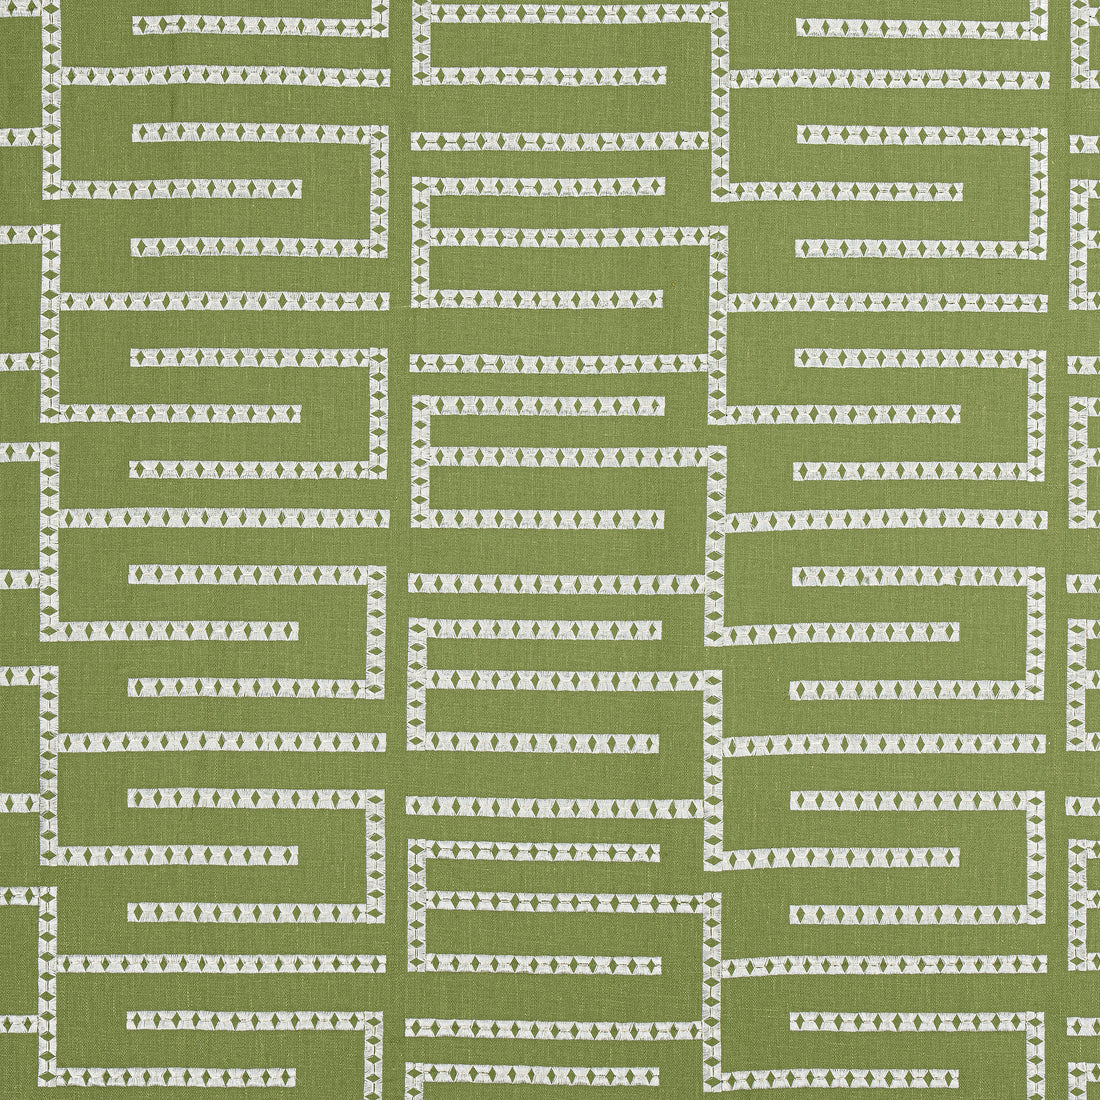 Architect Embroidery fabric in sage - pattern number W713630 - by Thibaut in the Grand Palace collection